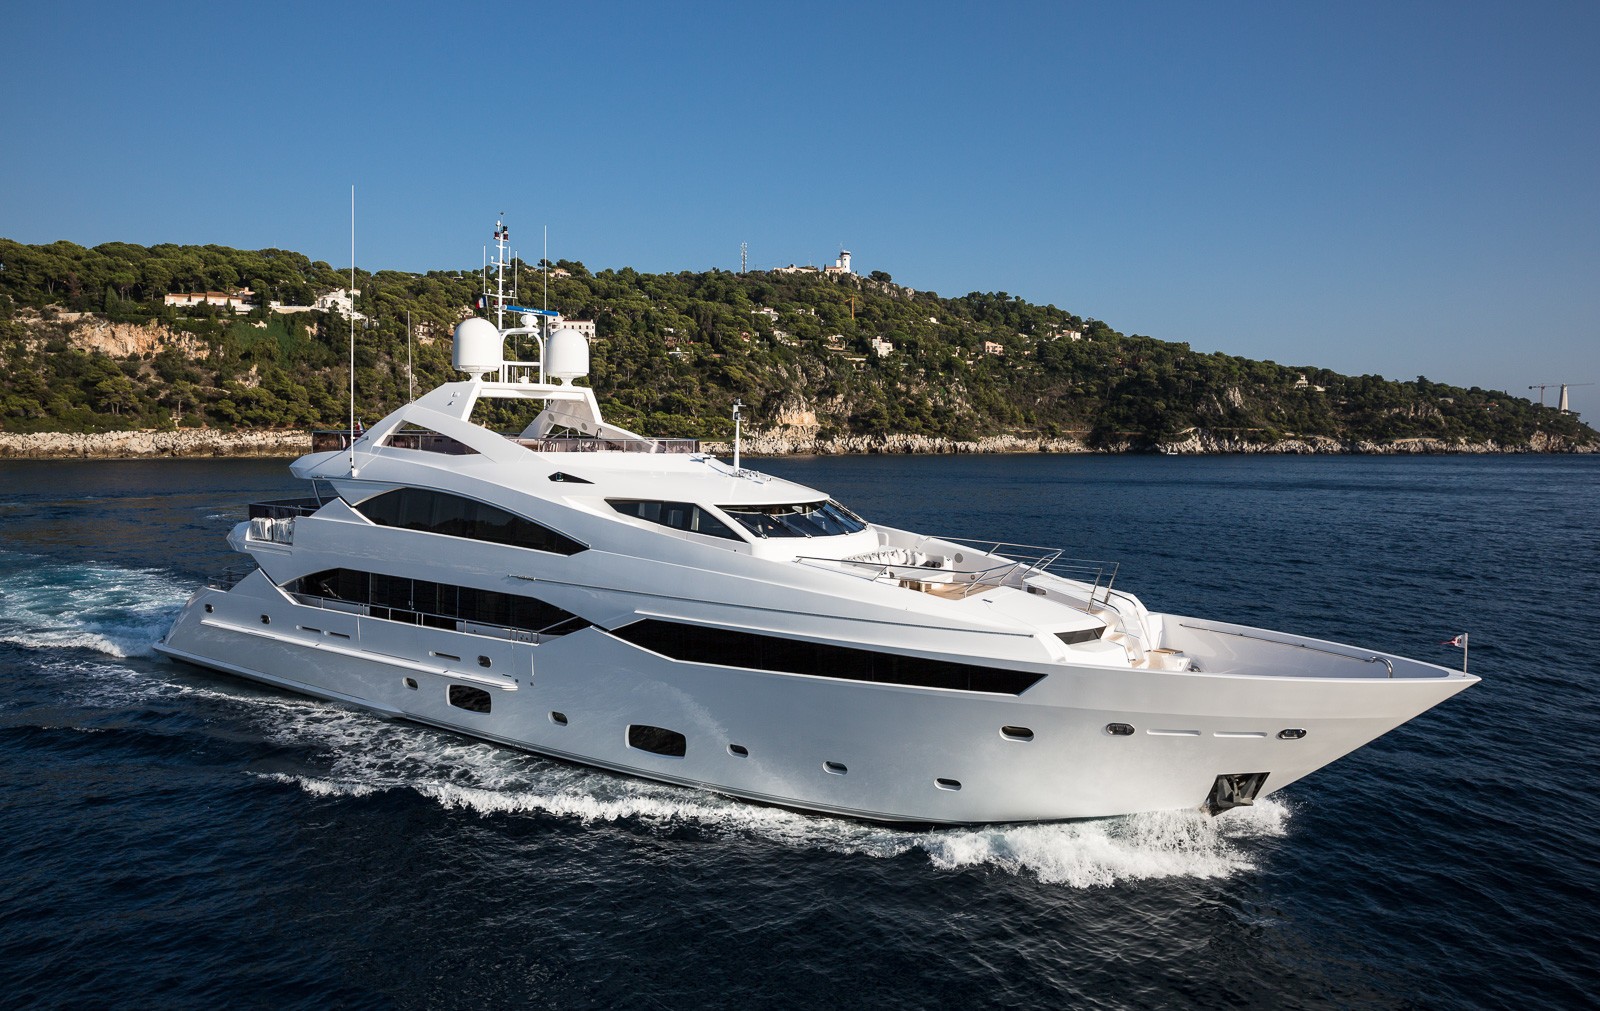 The 40m Yacht THUMPER